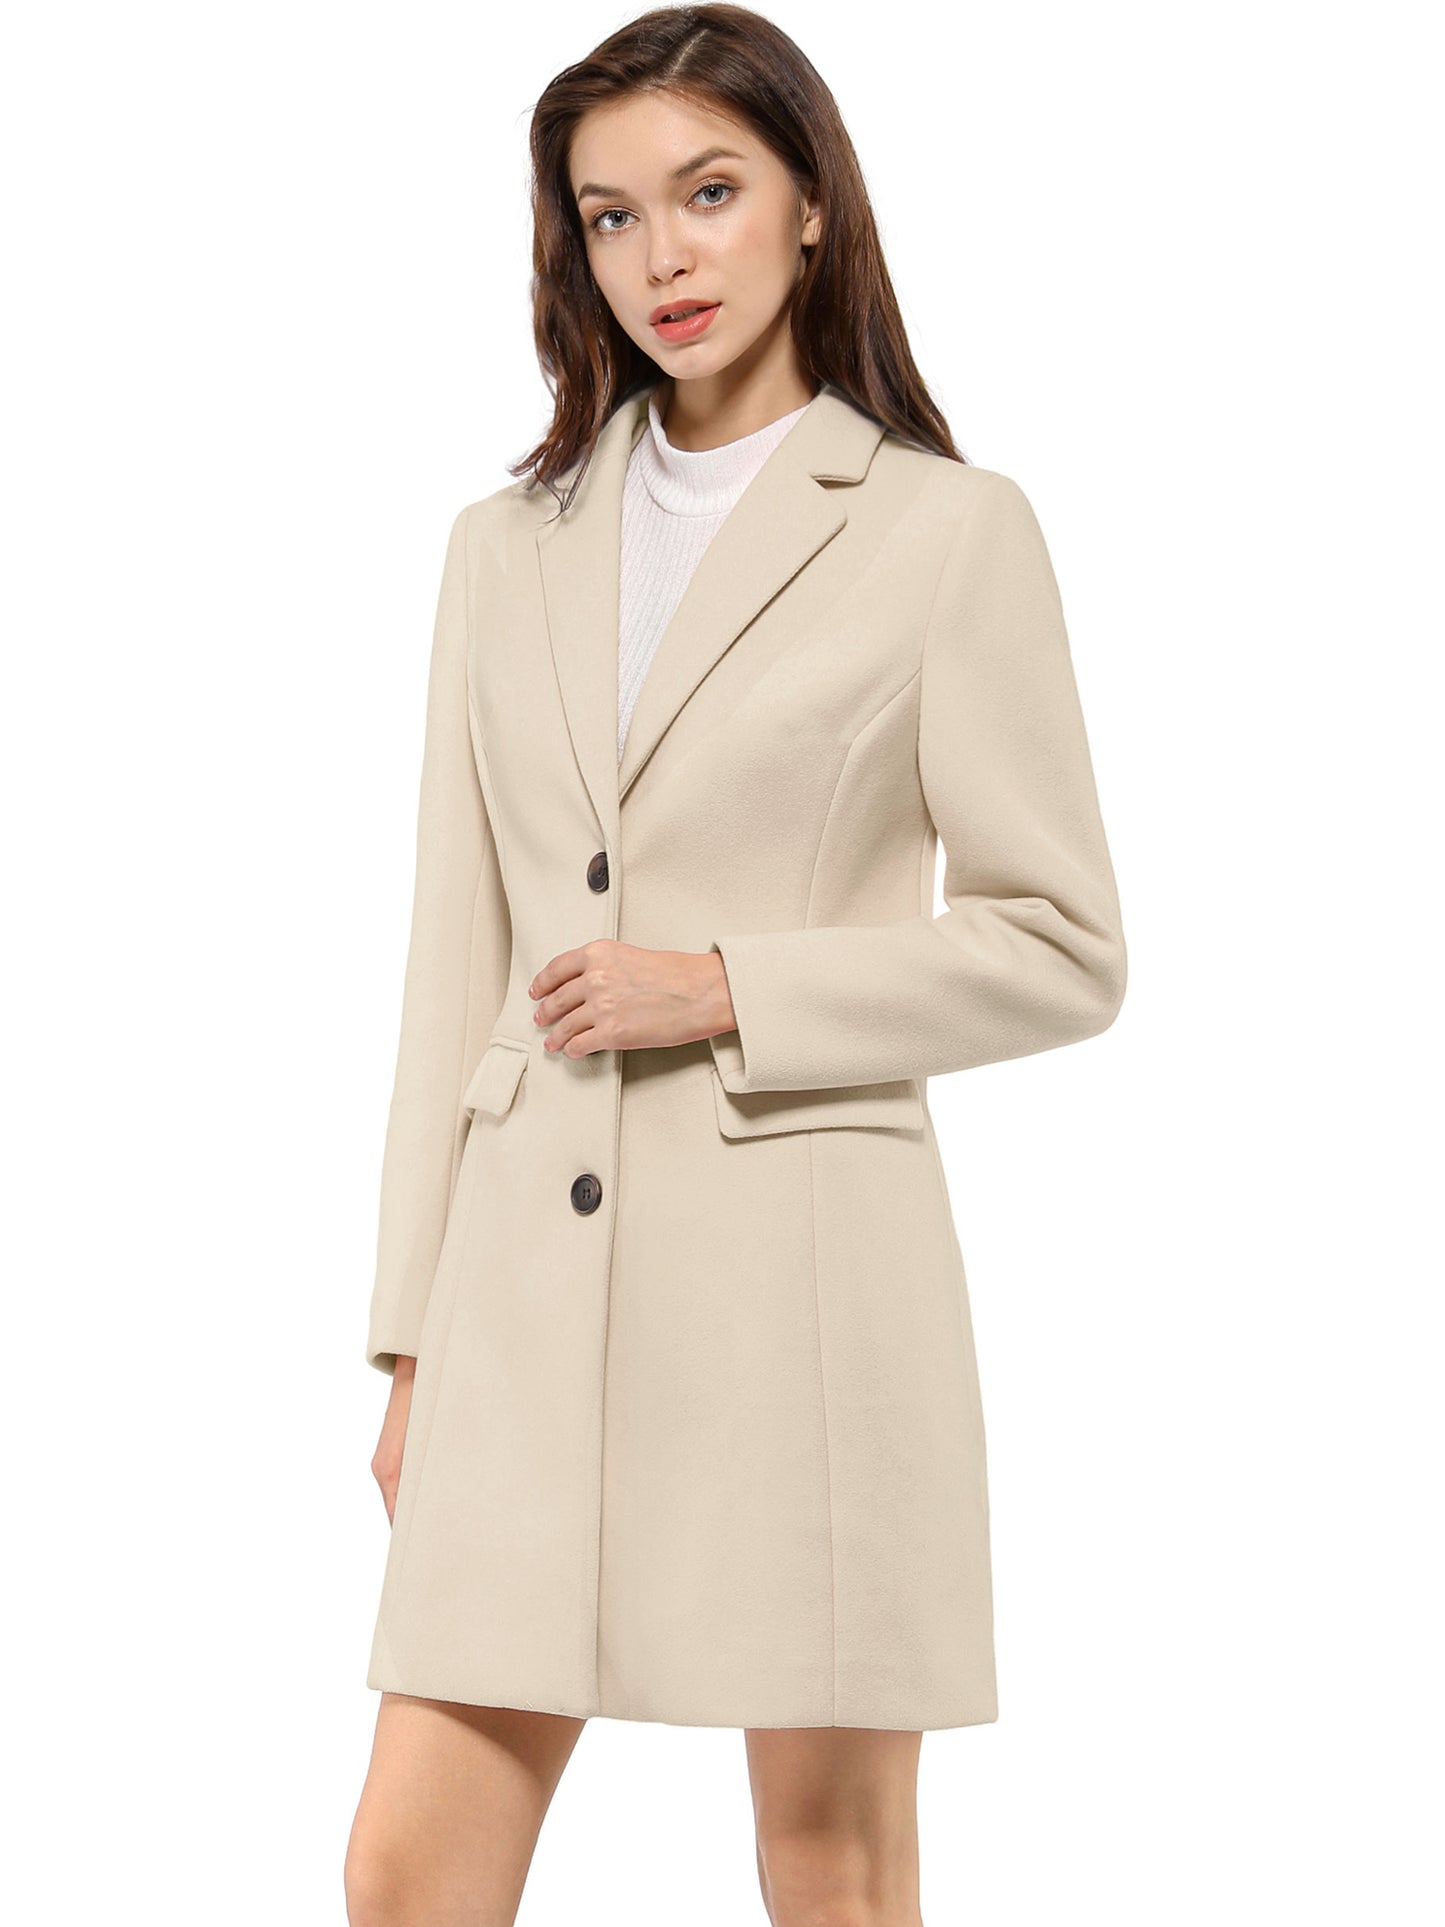 Allegra K Notched Lapel Single Breasted Outwear Winter Coat Cream White